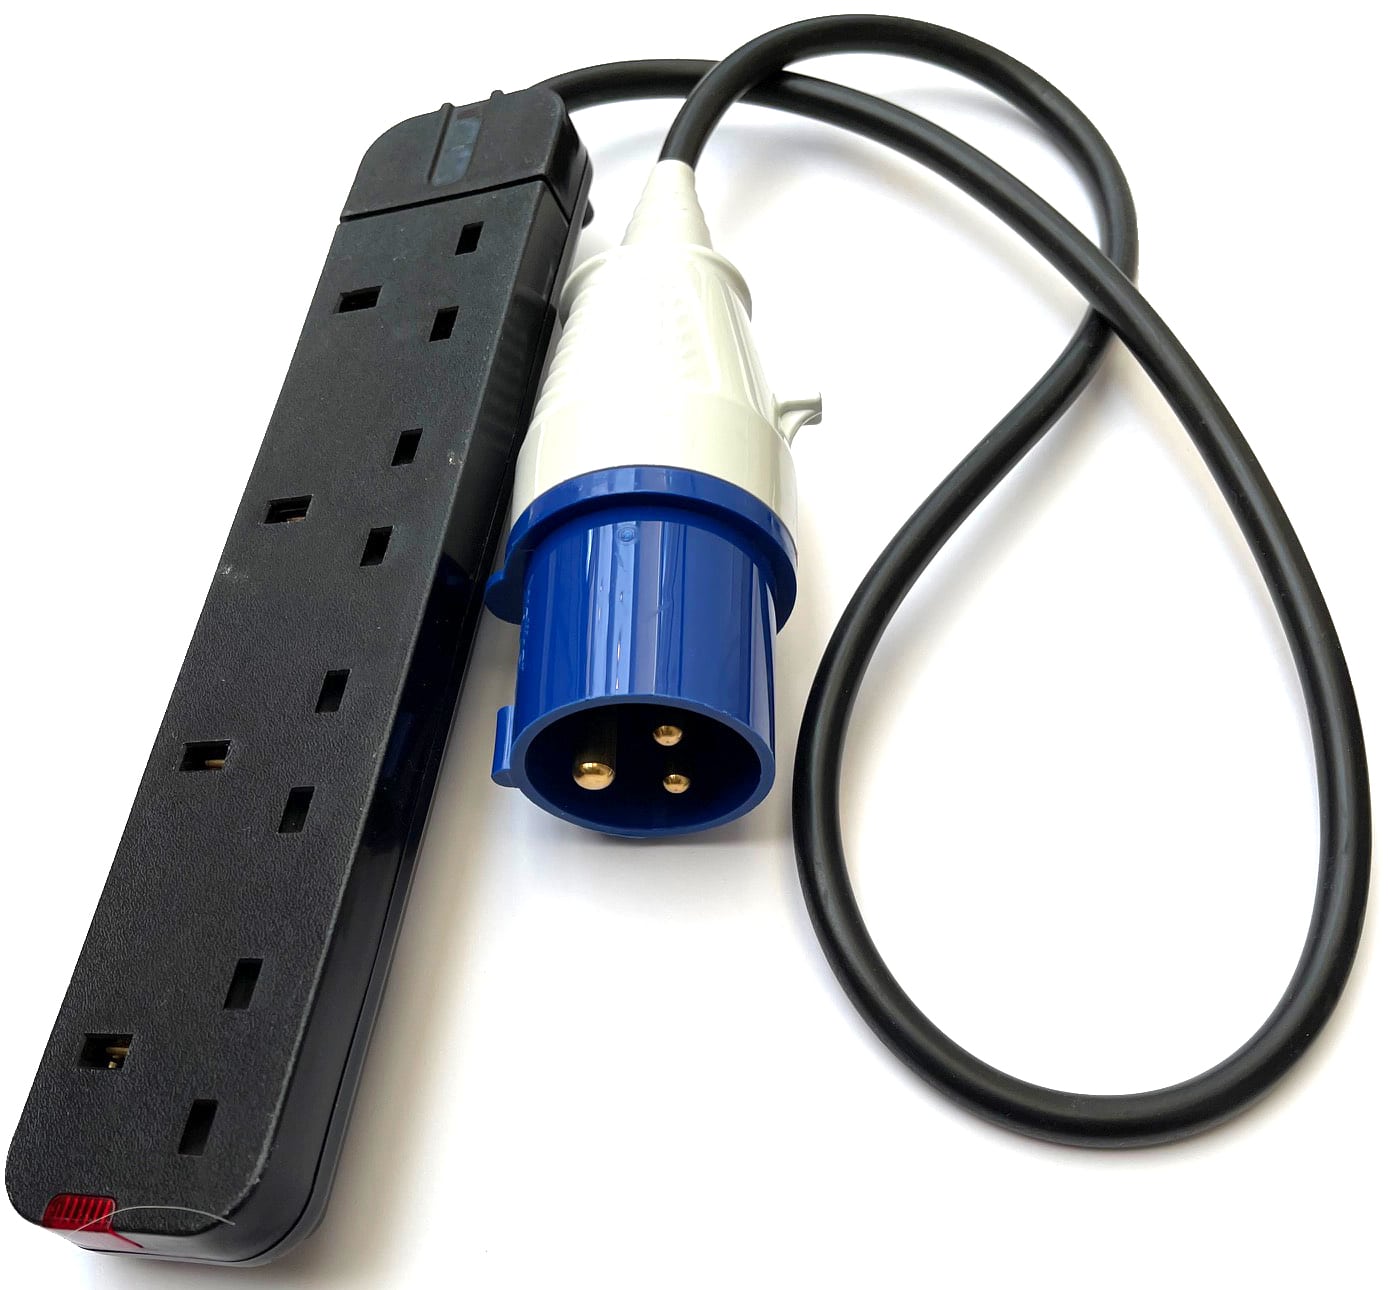 UK Suppliers One Metre Fly Lead 16a Blue Commando Plug to 4 gang UK 3 pin sockets